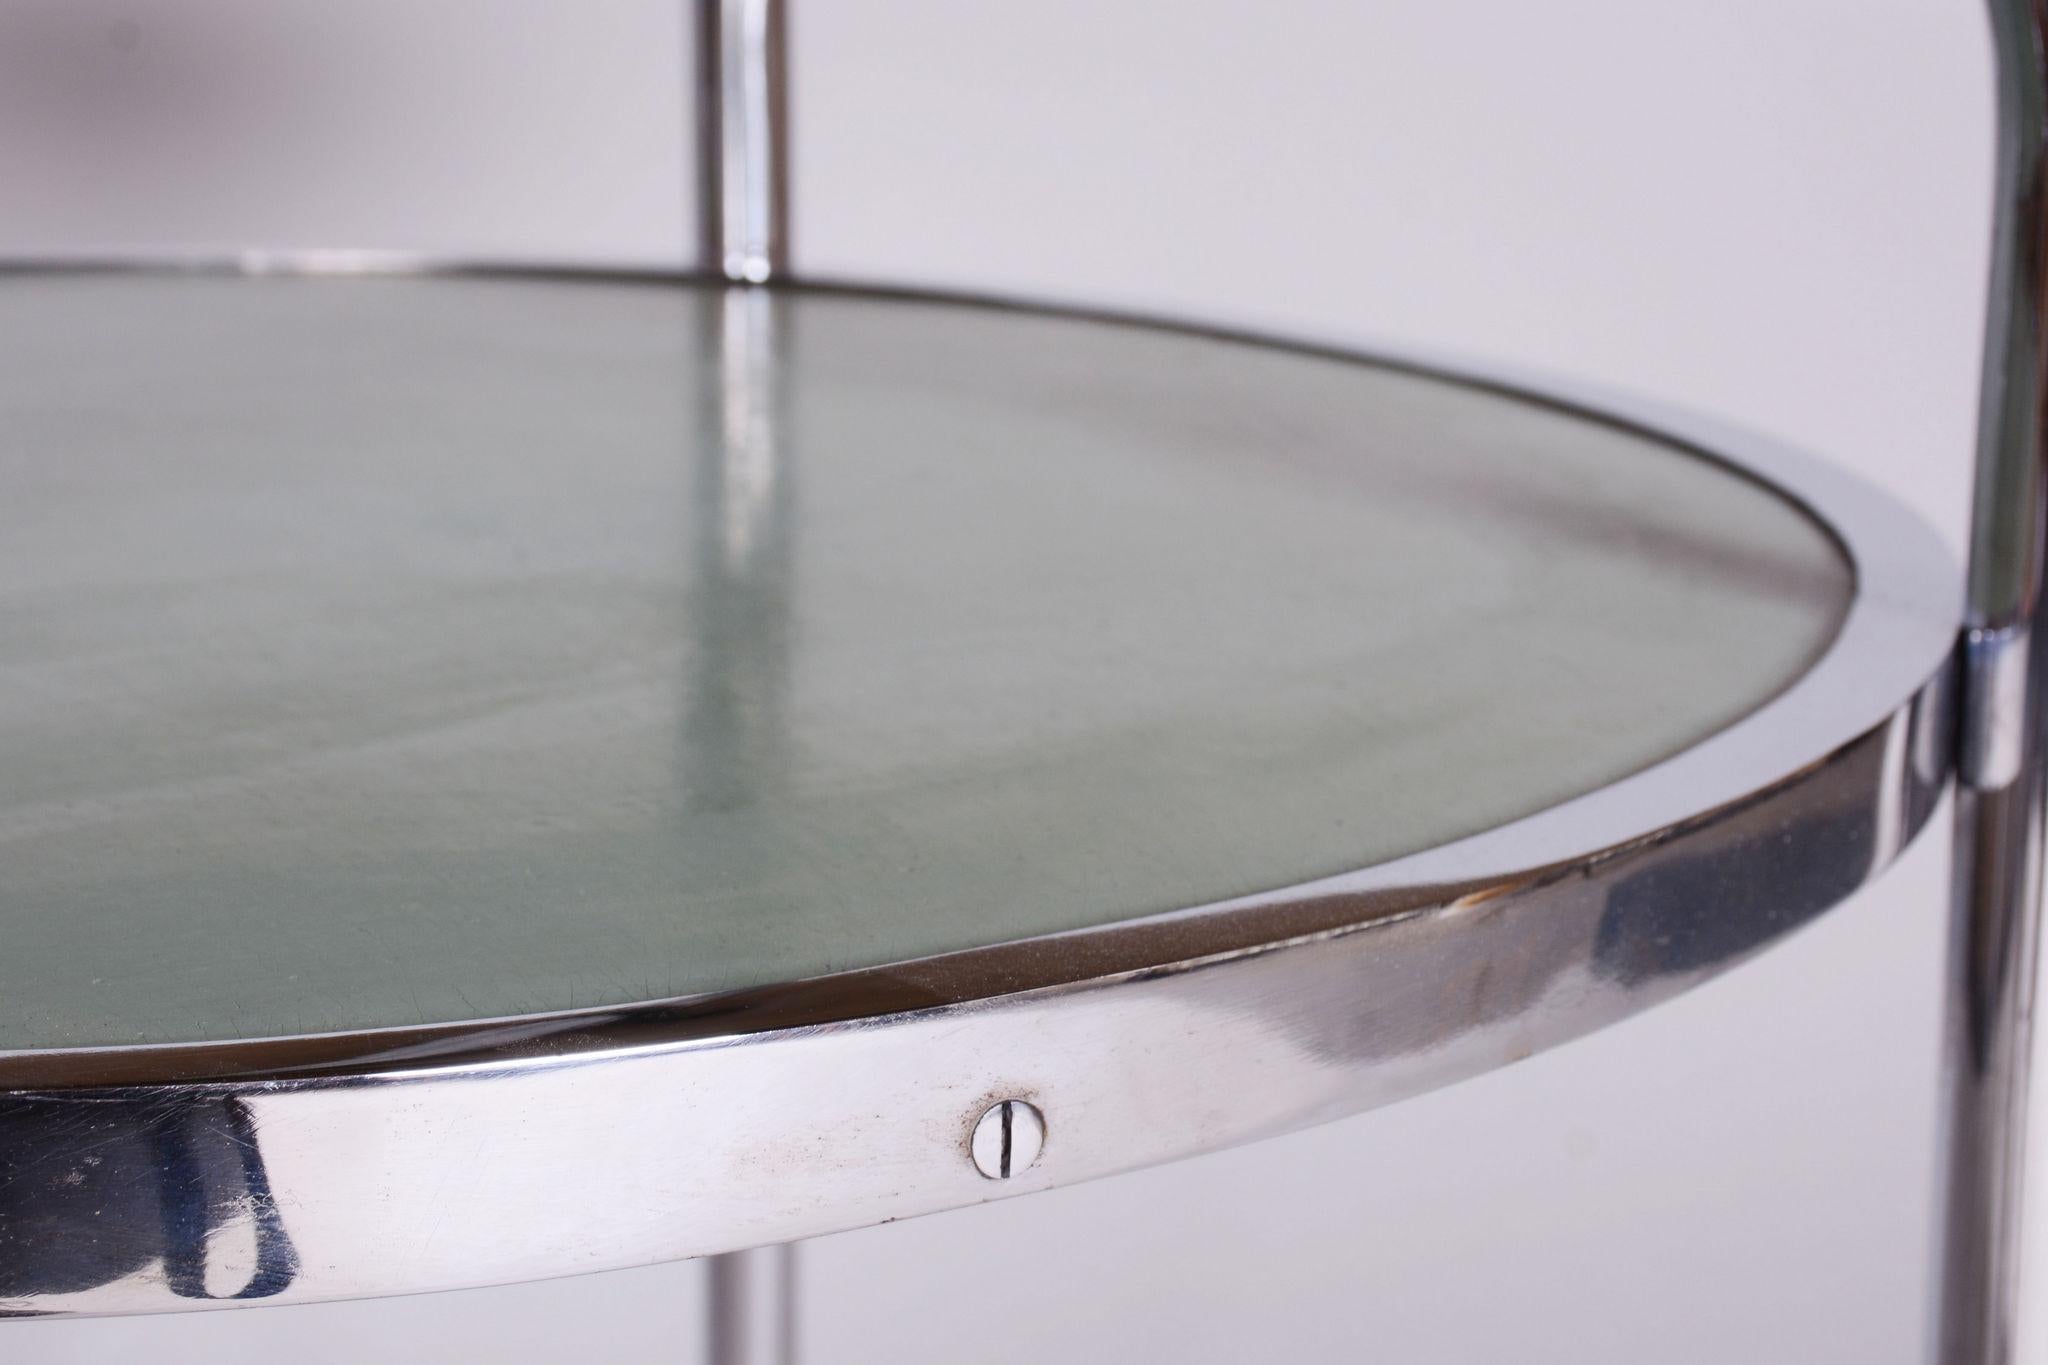 Restored Bauhaus Small Round Table, Chrome, Revived Polish, Czechia, 1930s For Sale 1